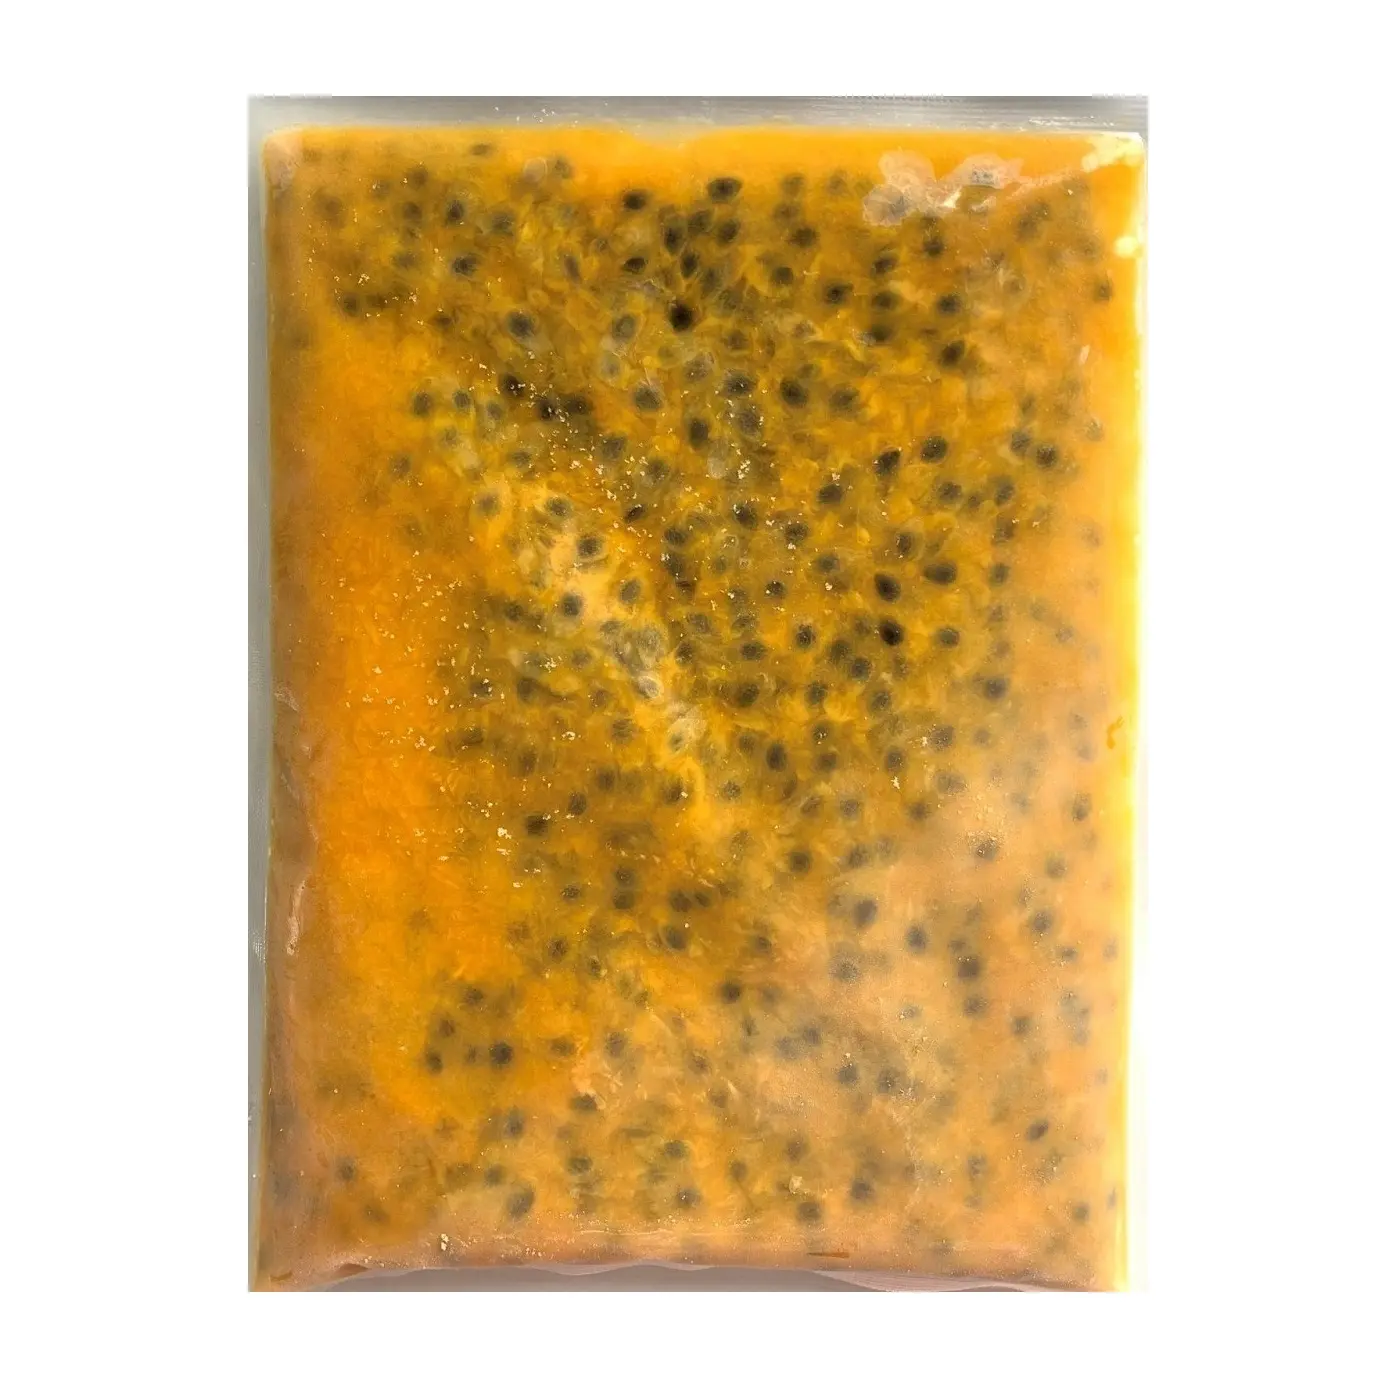 Natural Low-Fat Sugar-Free Antioxidants Nutrients Sterilized Bag Passion Fruit Puree with Sour & Sweet Taste